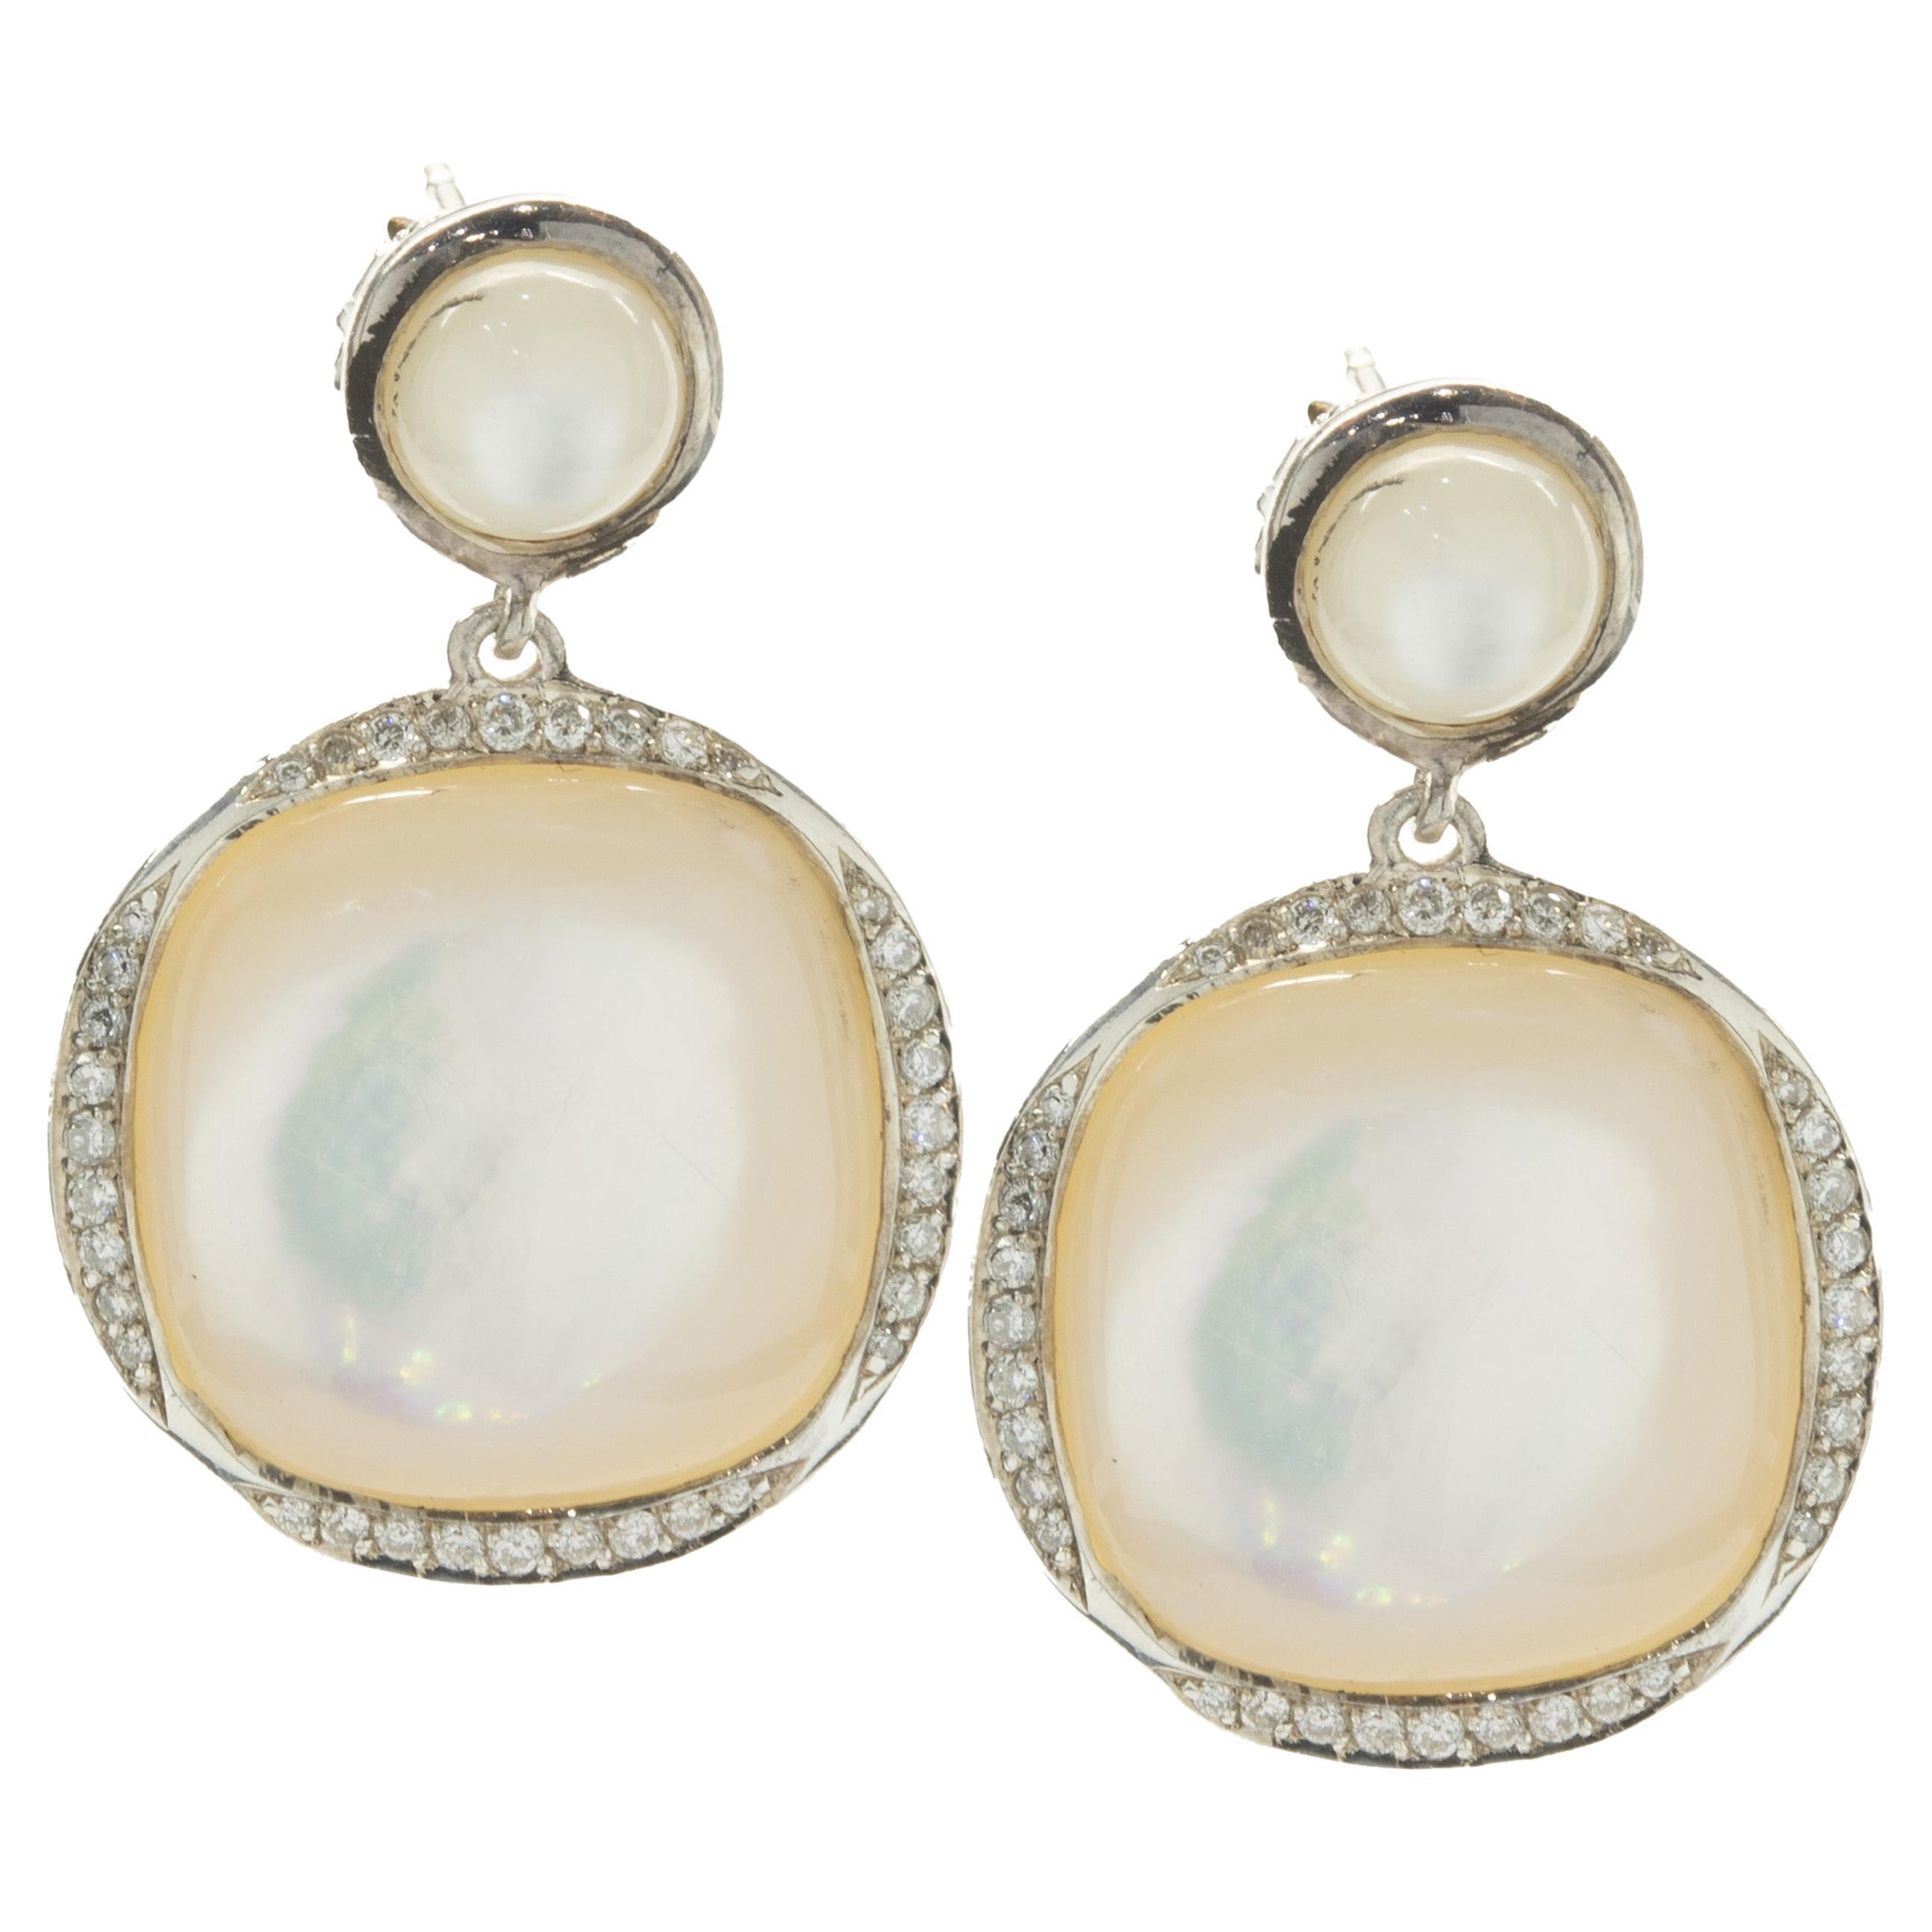 Ippolita Sterling Silver Mother of Pearl and Diamond Drop Earrings